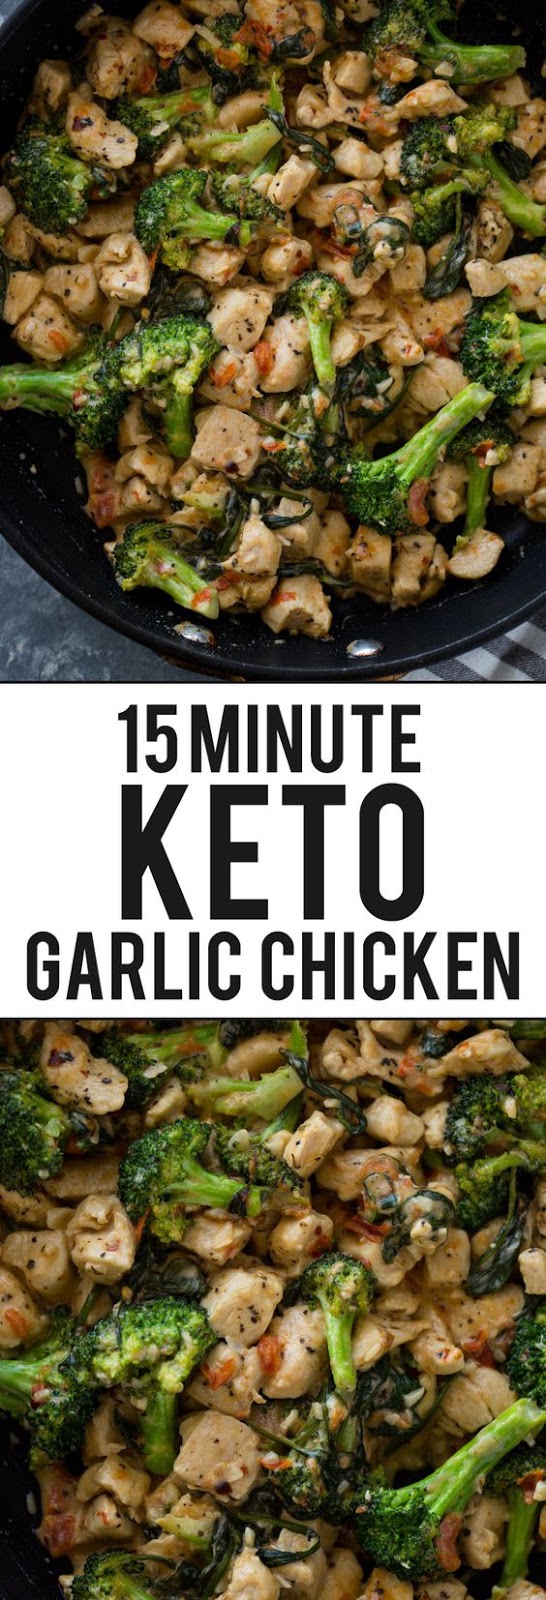 Cheesy garlic chicken bites cooked in one pan with broccoli and spinach in under 15 minutes. This quick tasty dish is a great keto option and can be served with zoodles or pasta!